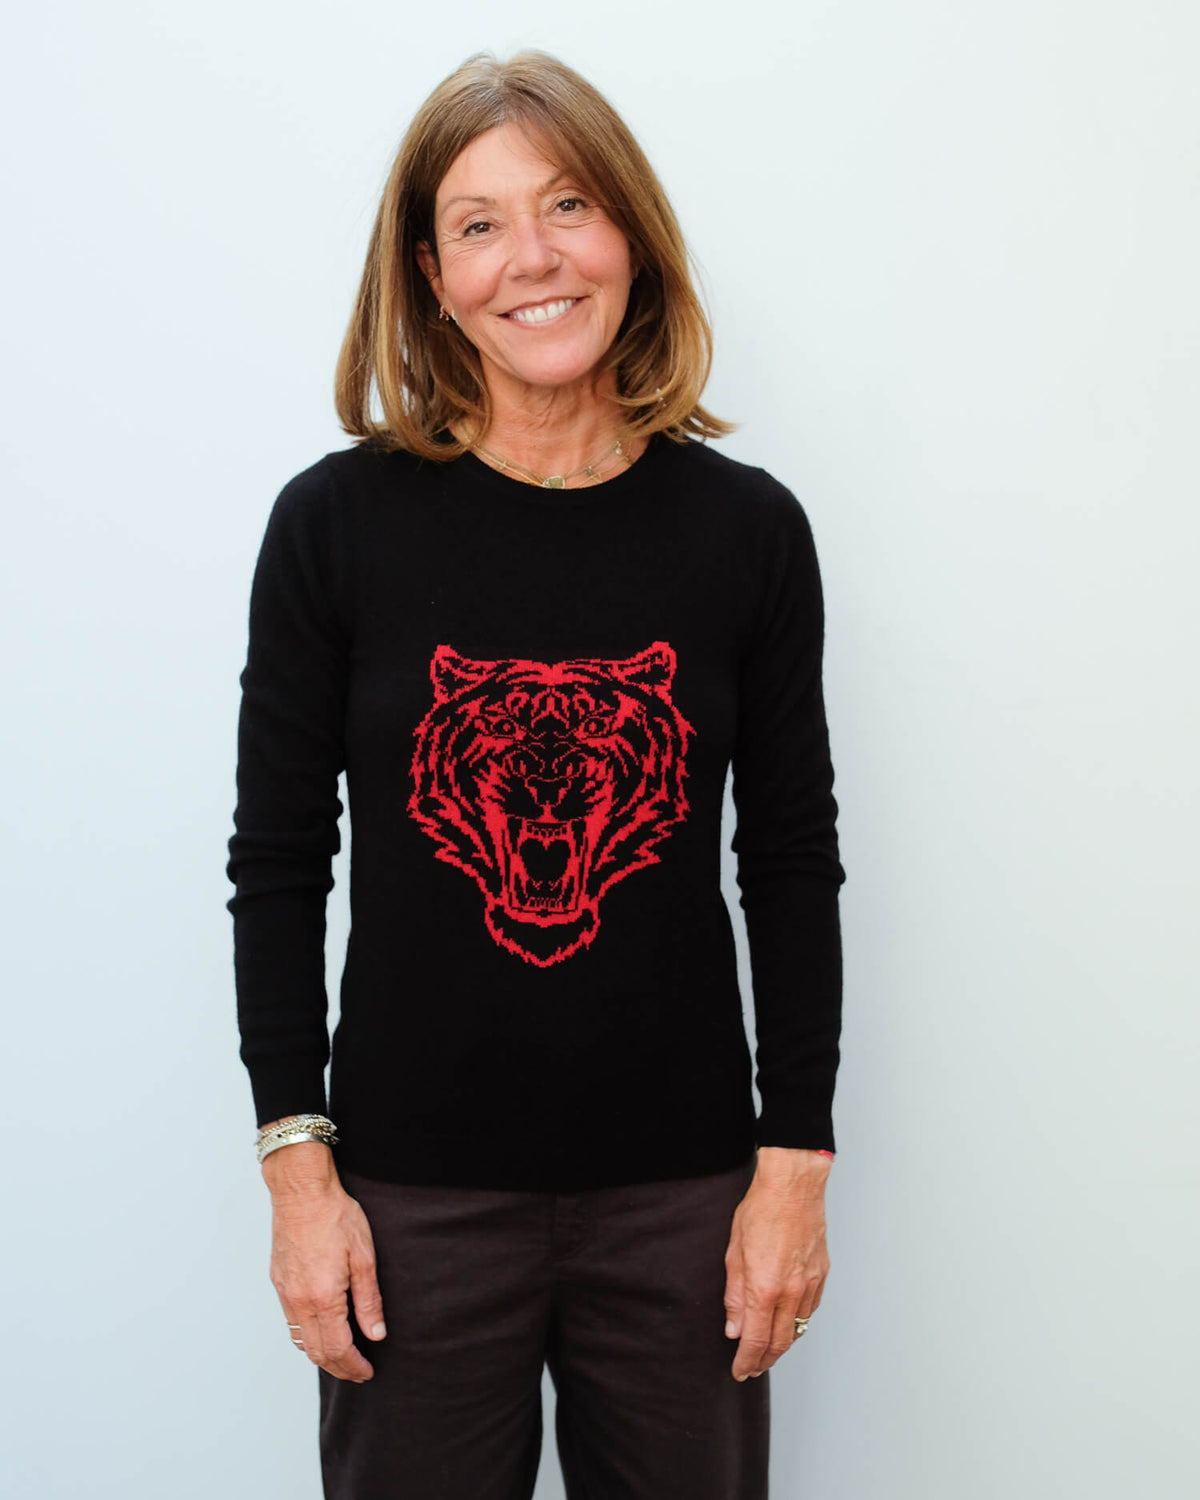 JU Lion crew in black and red